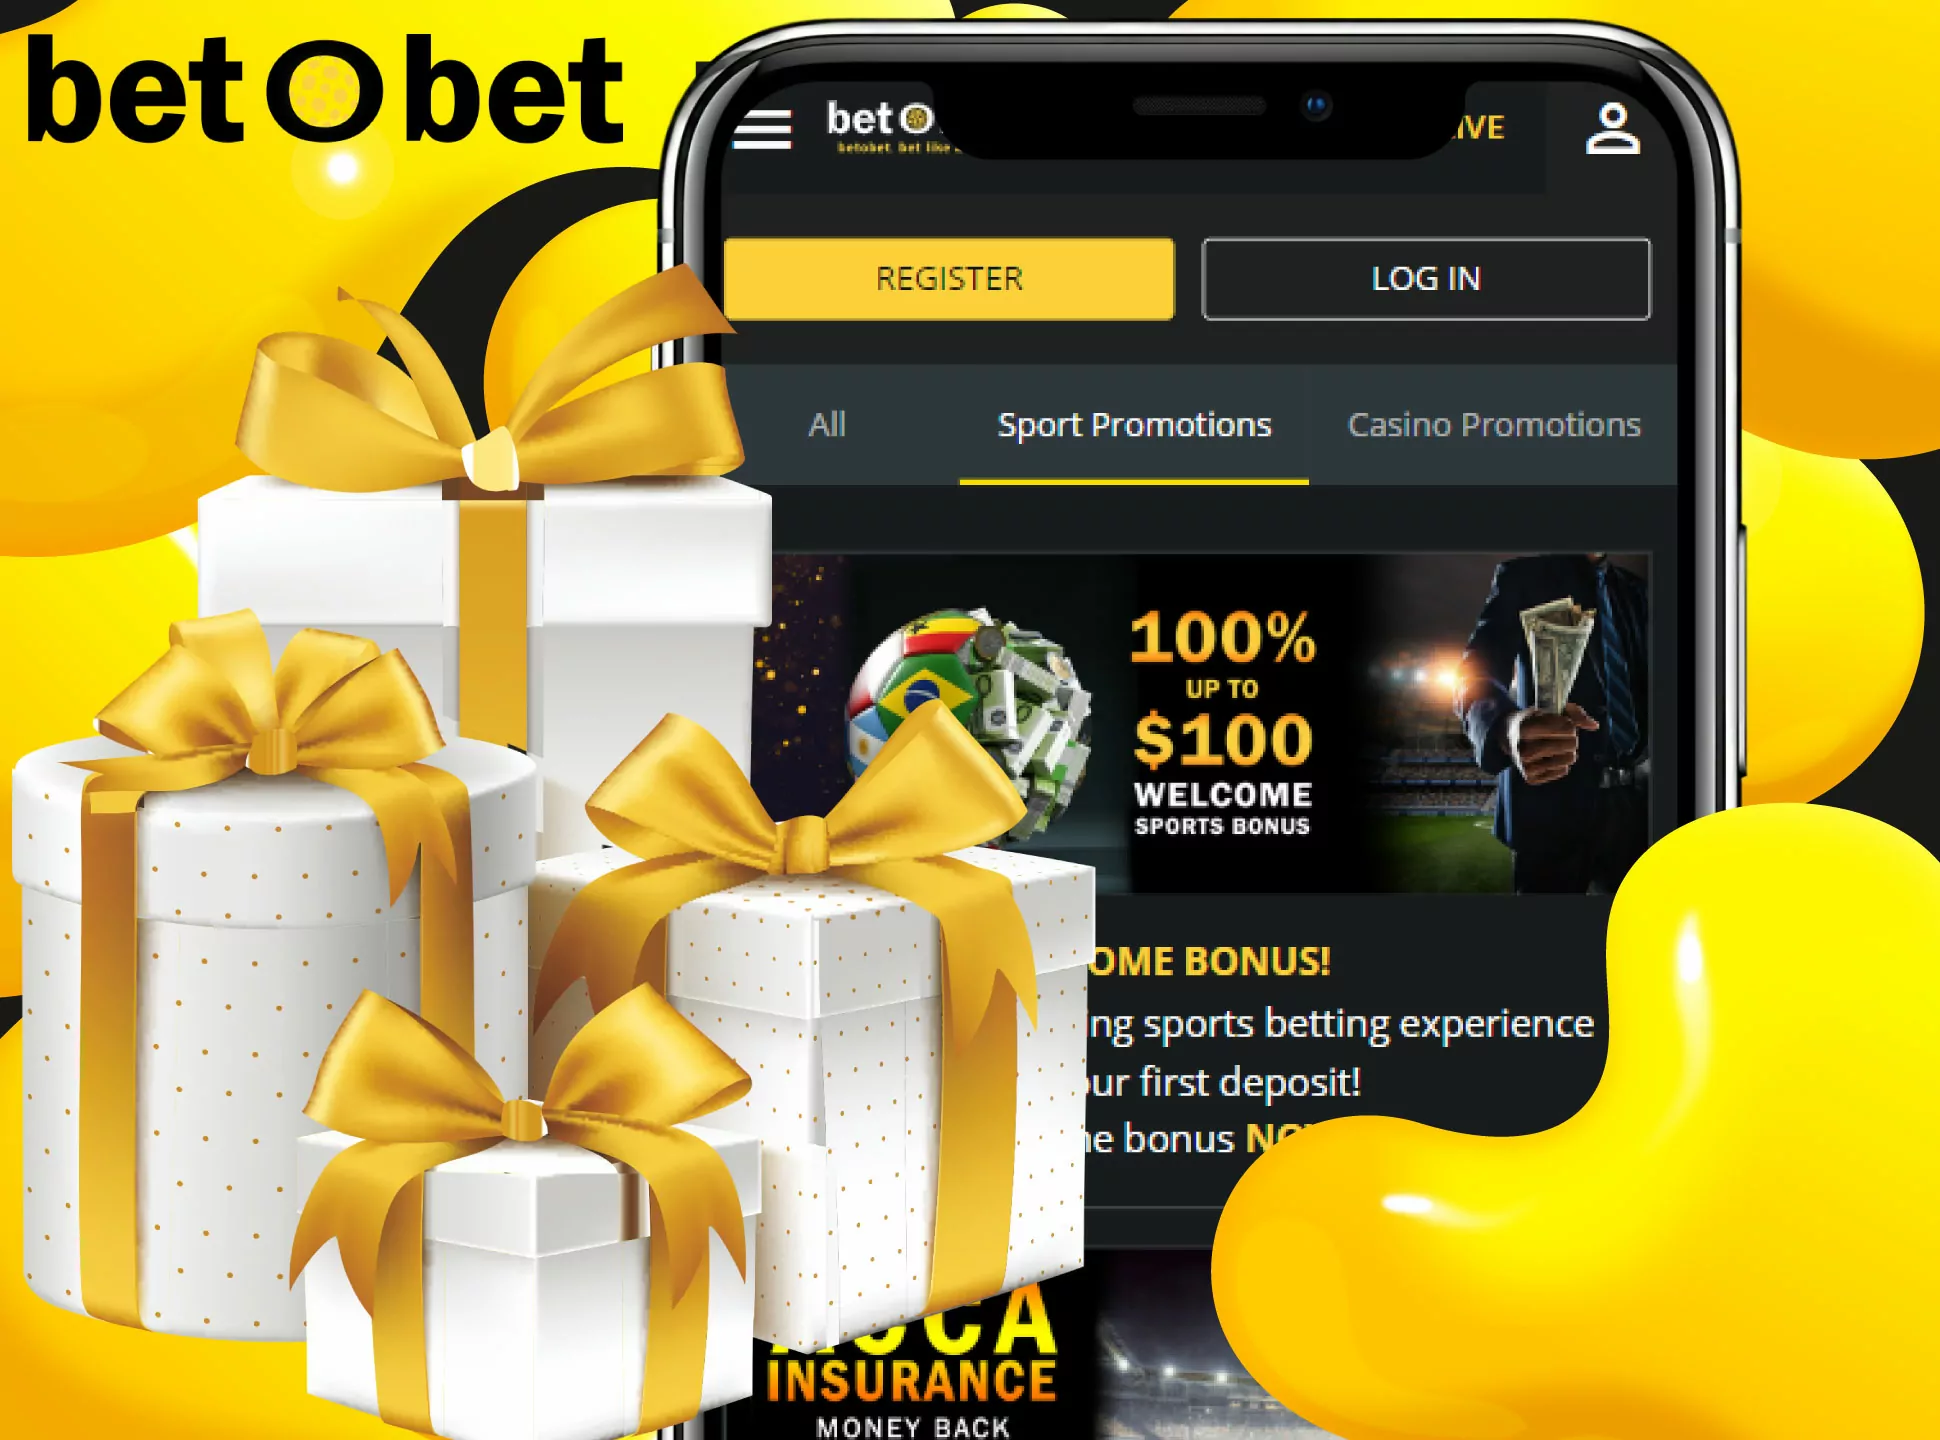 Both new and regular players can receive generous bonuses from Betobet.